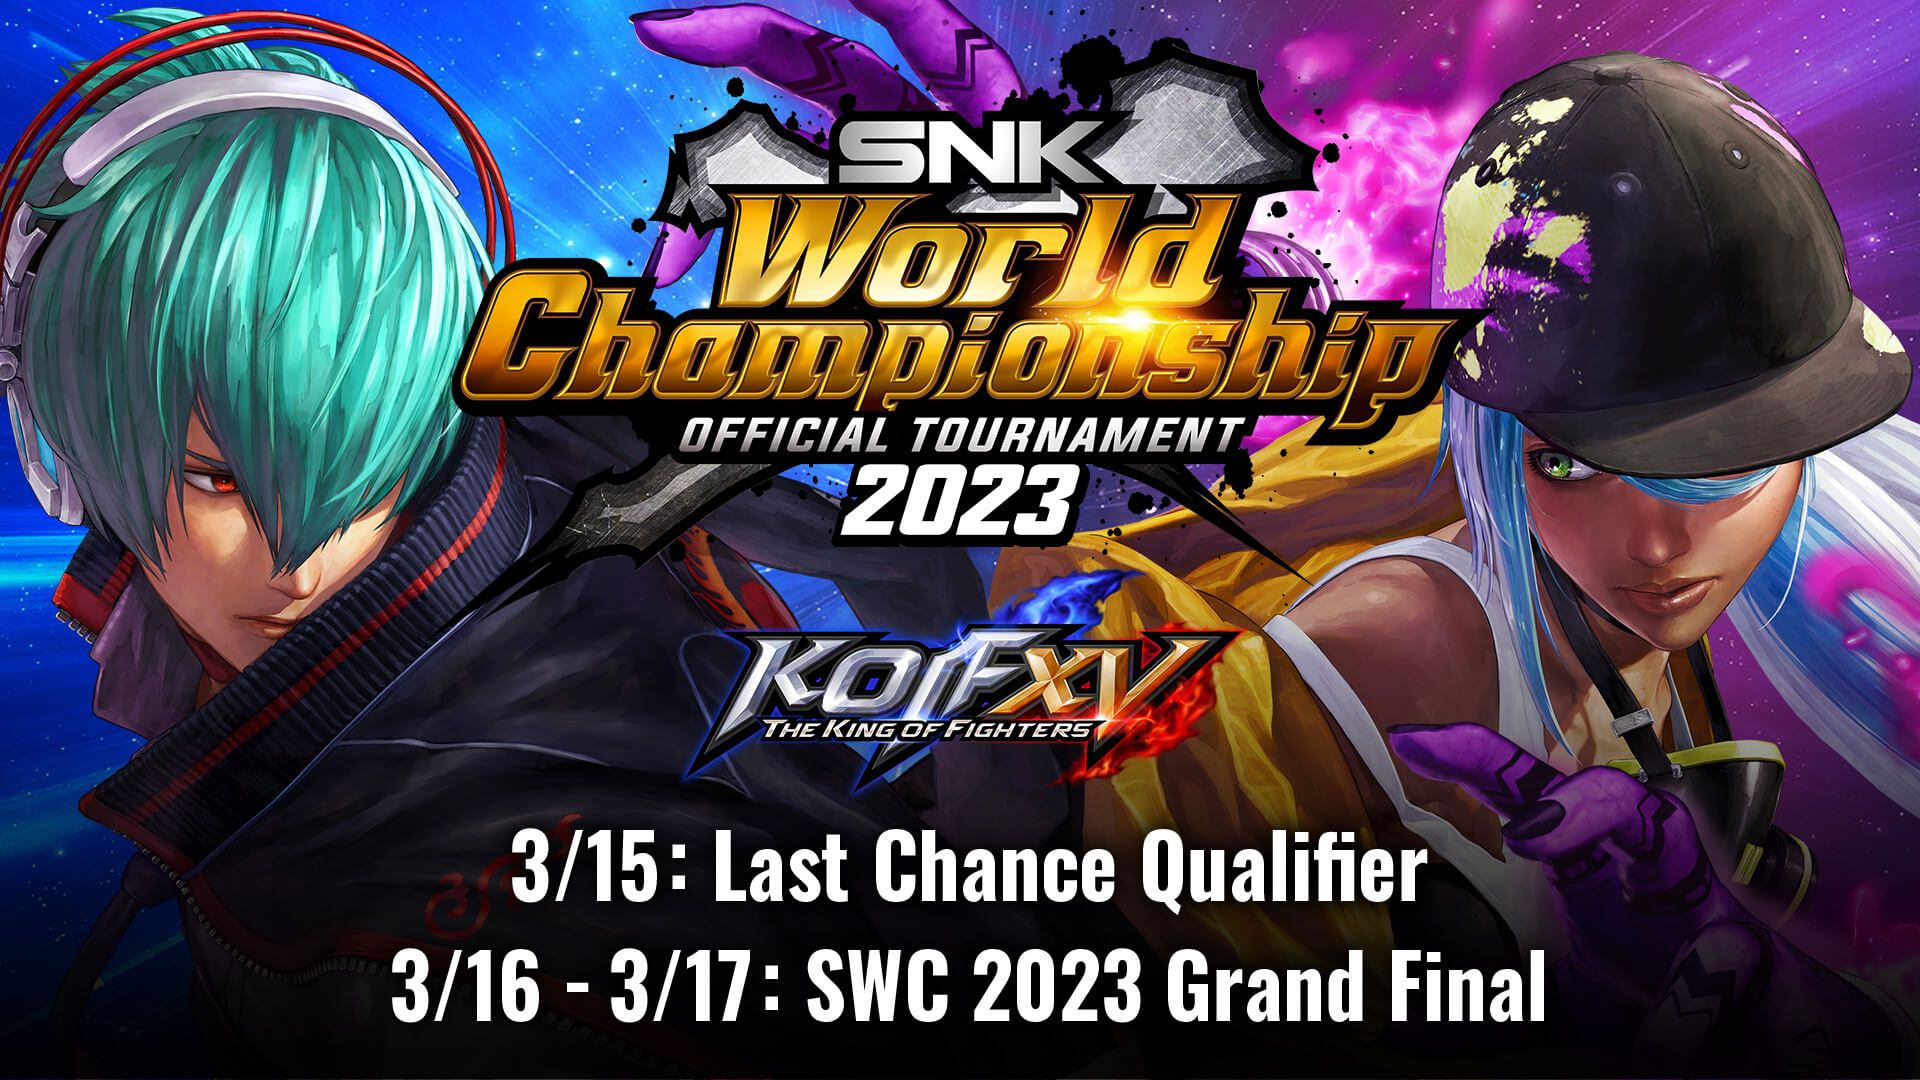 Registrations for the SNK World Championship 2023 LCQ are Live